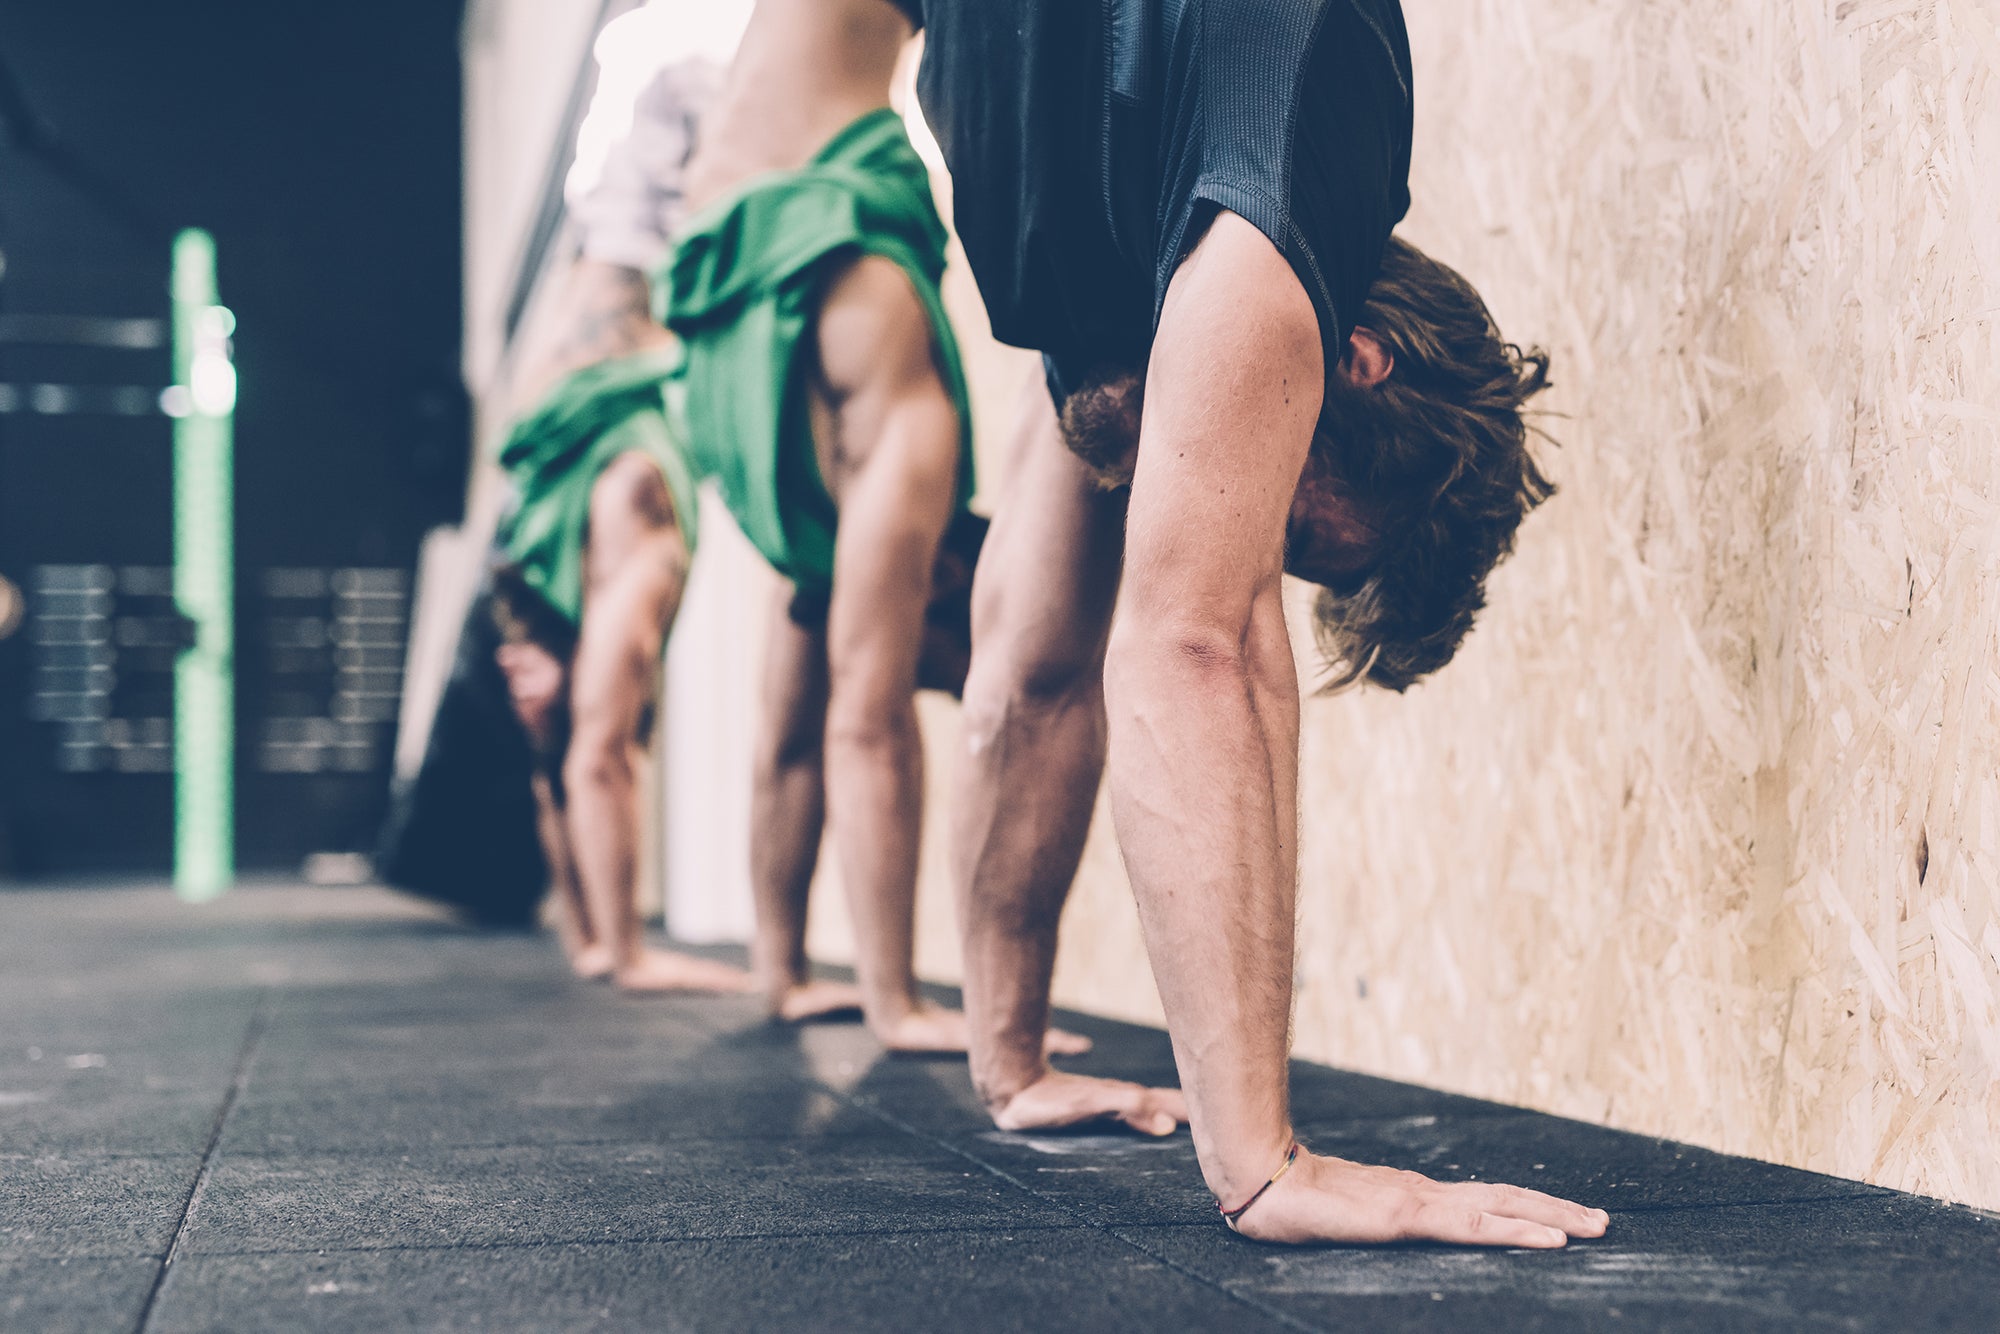 Getting Familiar With The Floor: How To Get Your First Handstand